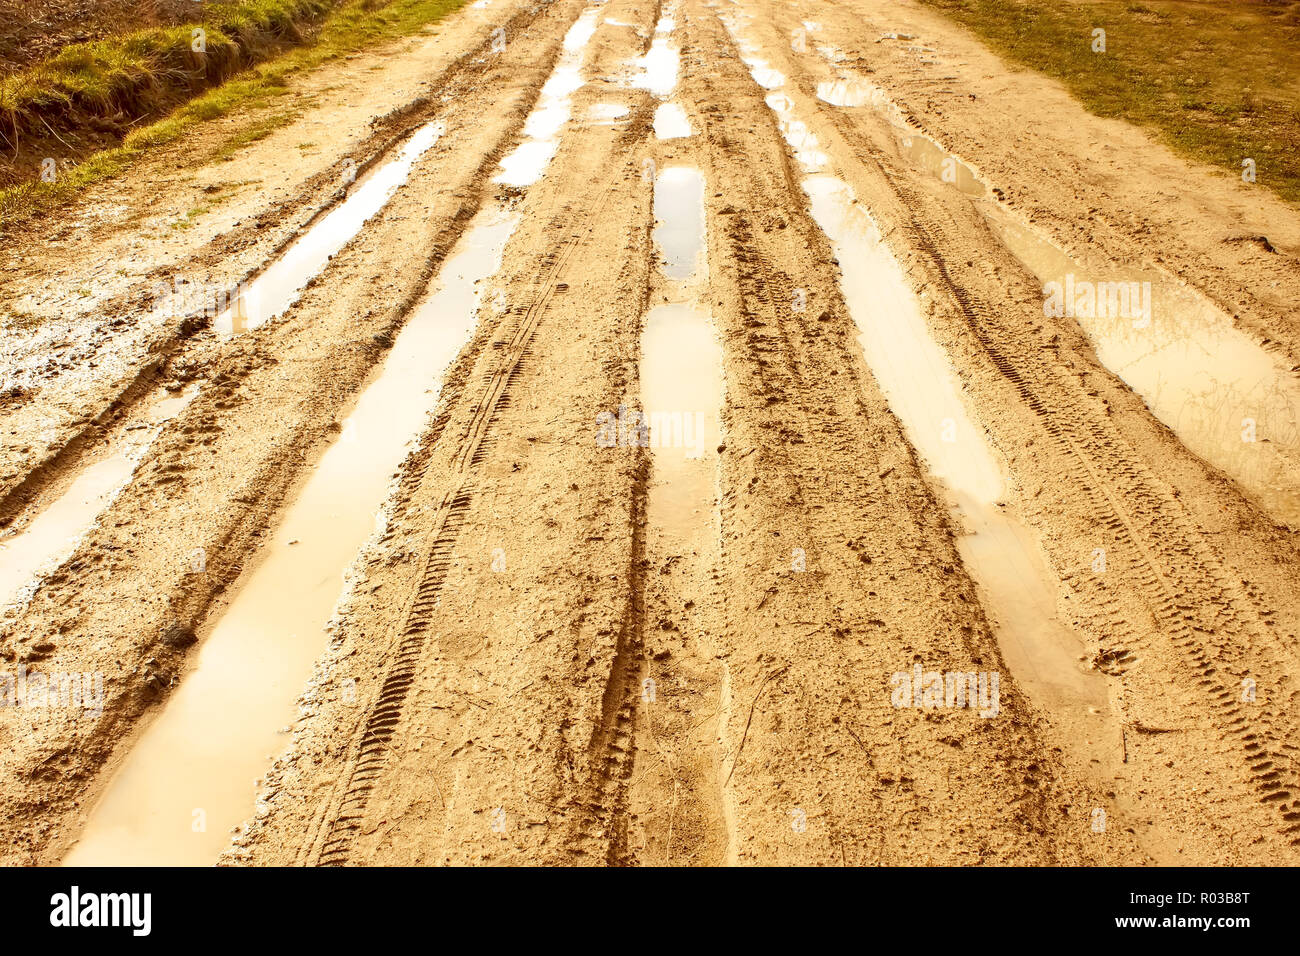 Sandstone covered rural road after the rain with wheels traces filled with water Stock Photo